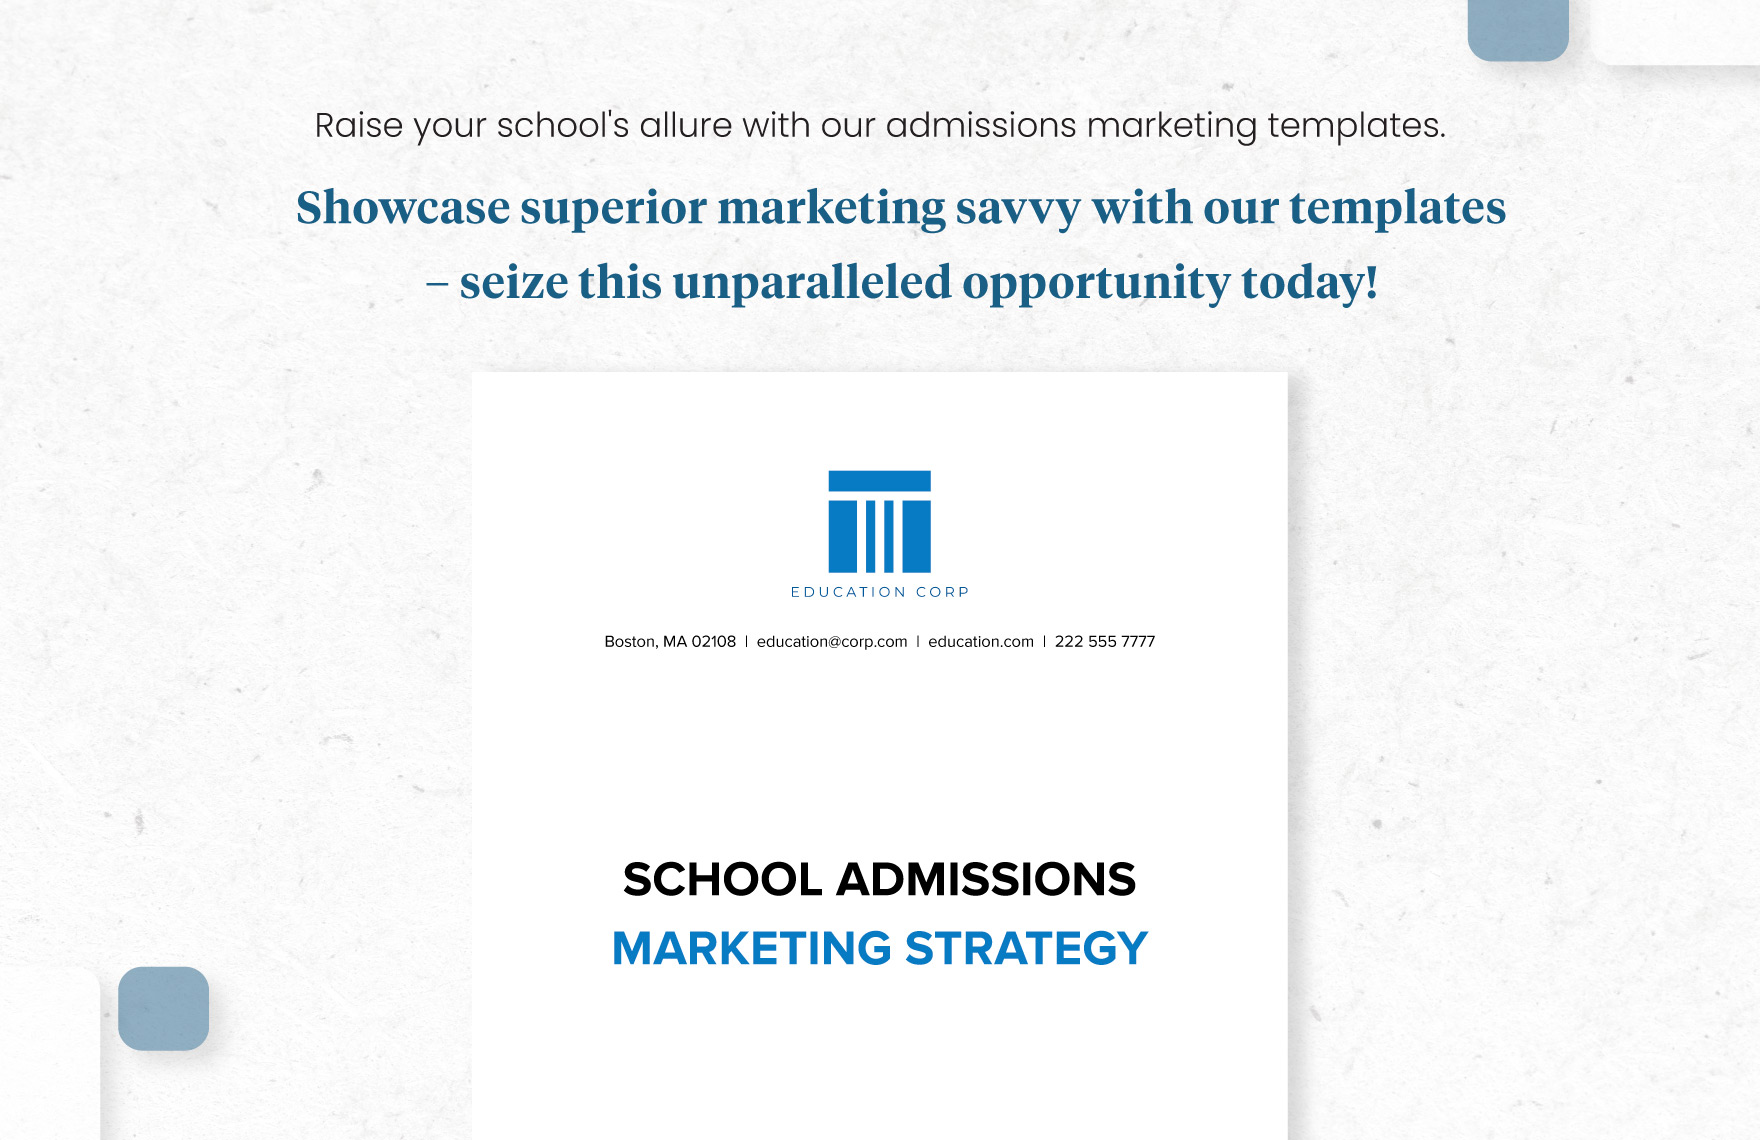 School Admissions Marketing Strategy Template